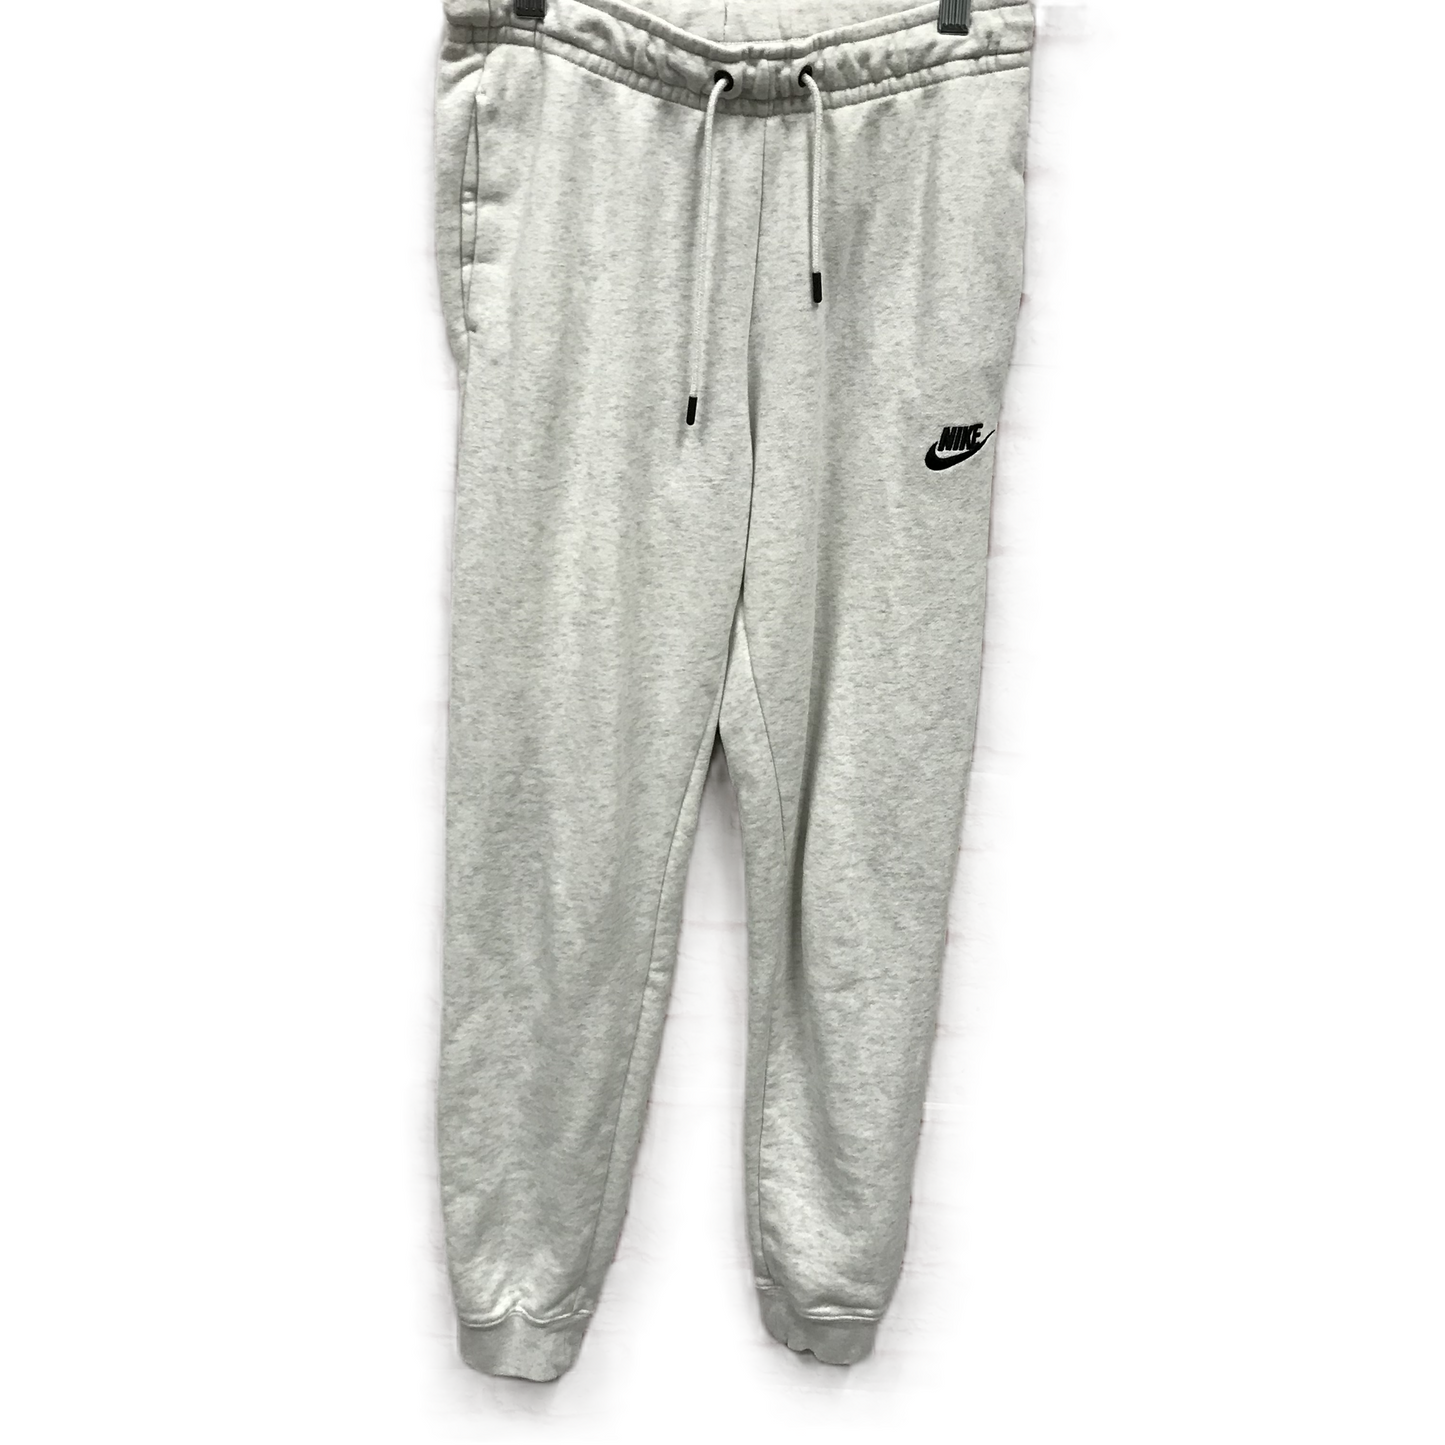 Grey Athletic Pants By Nike Apparel, Size: Xs